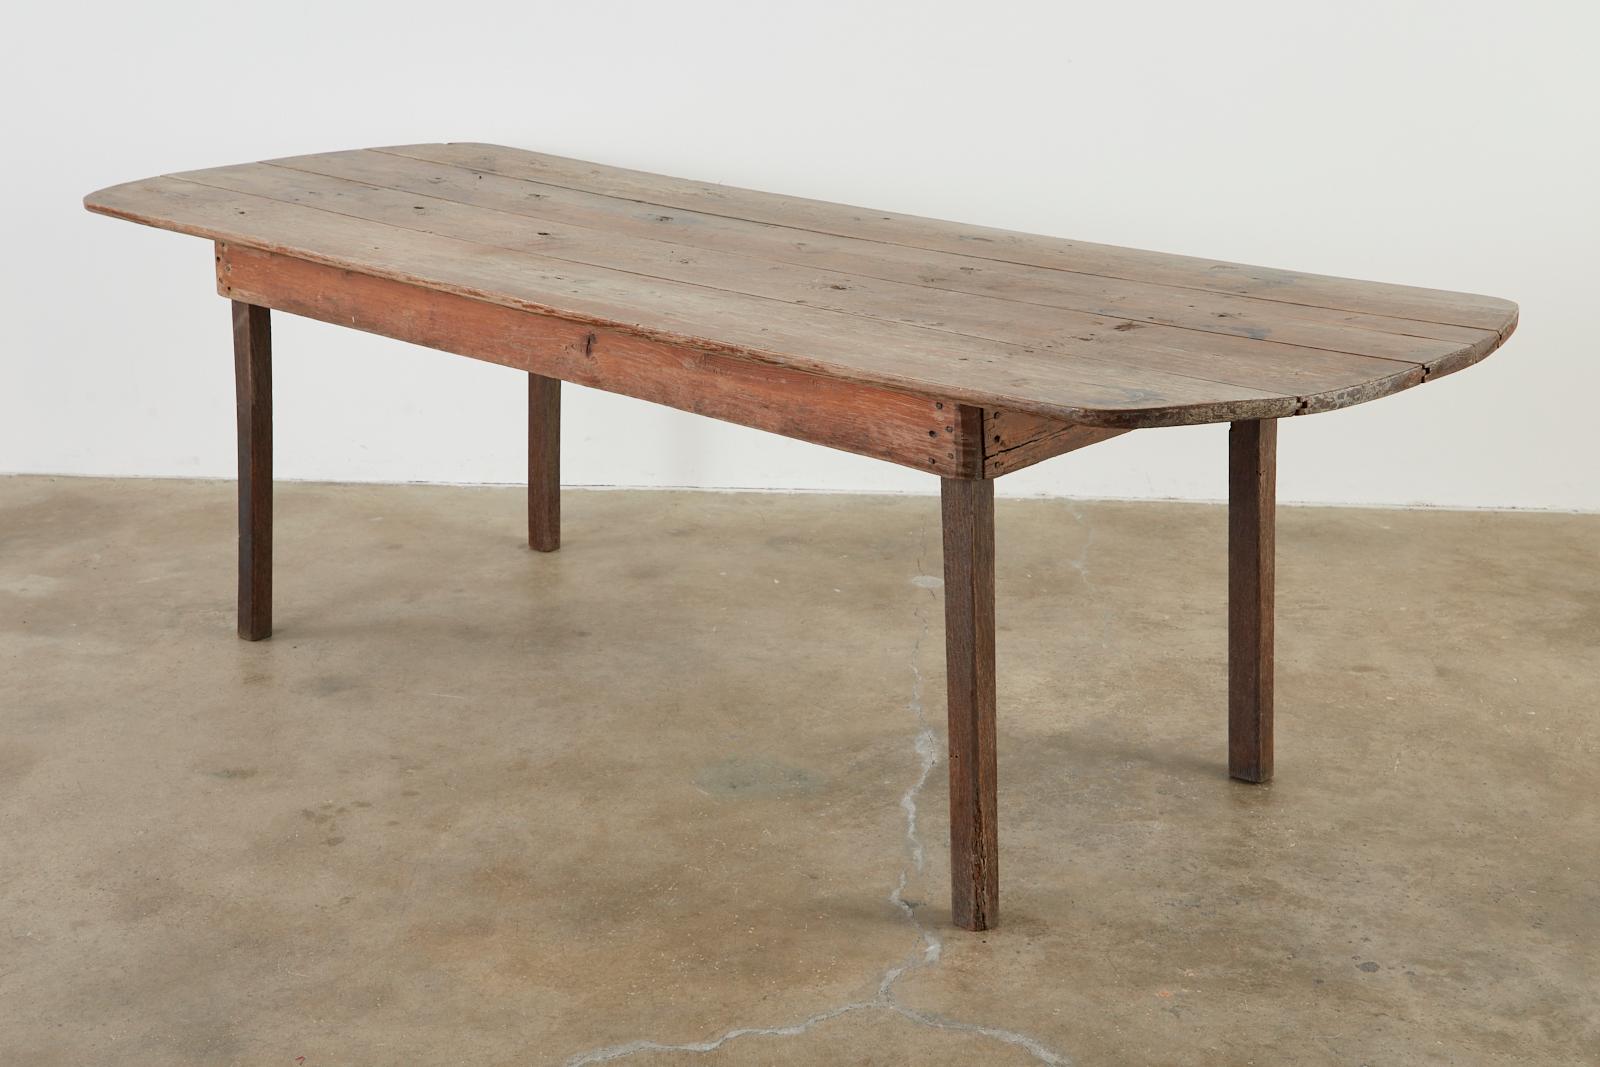 Rustic 19th Century Country English Pine Farmhouse Harvest Table